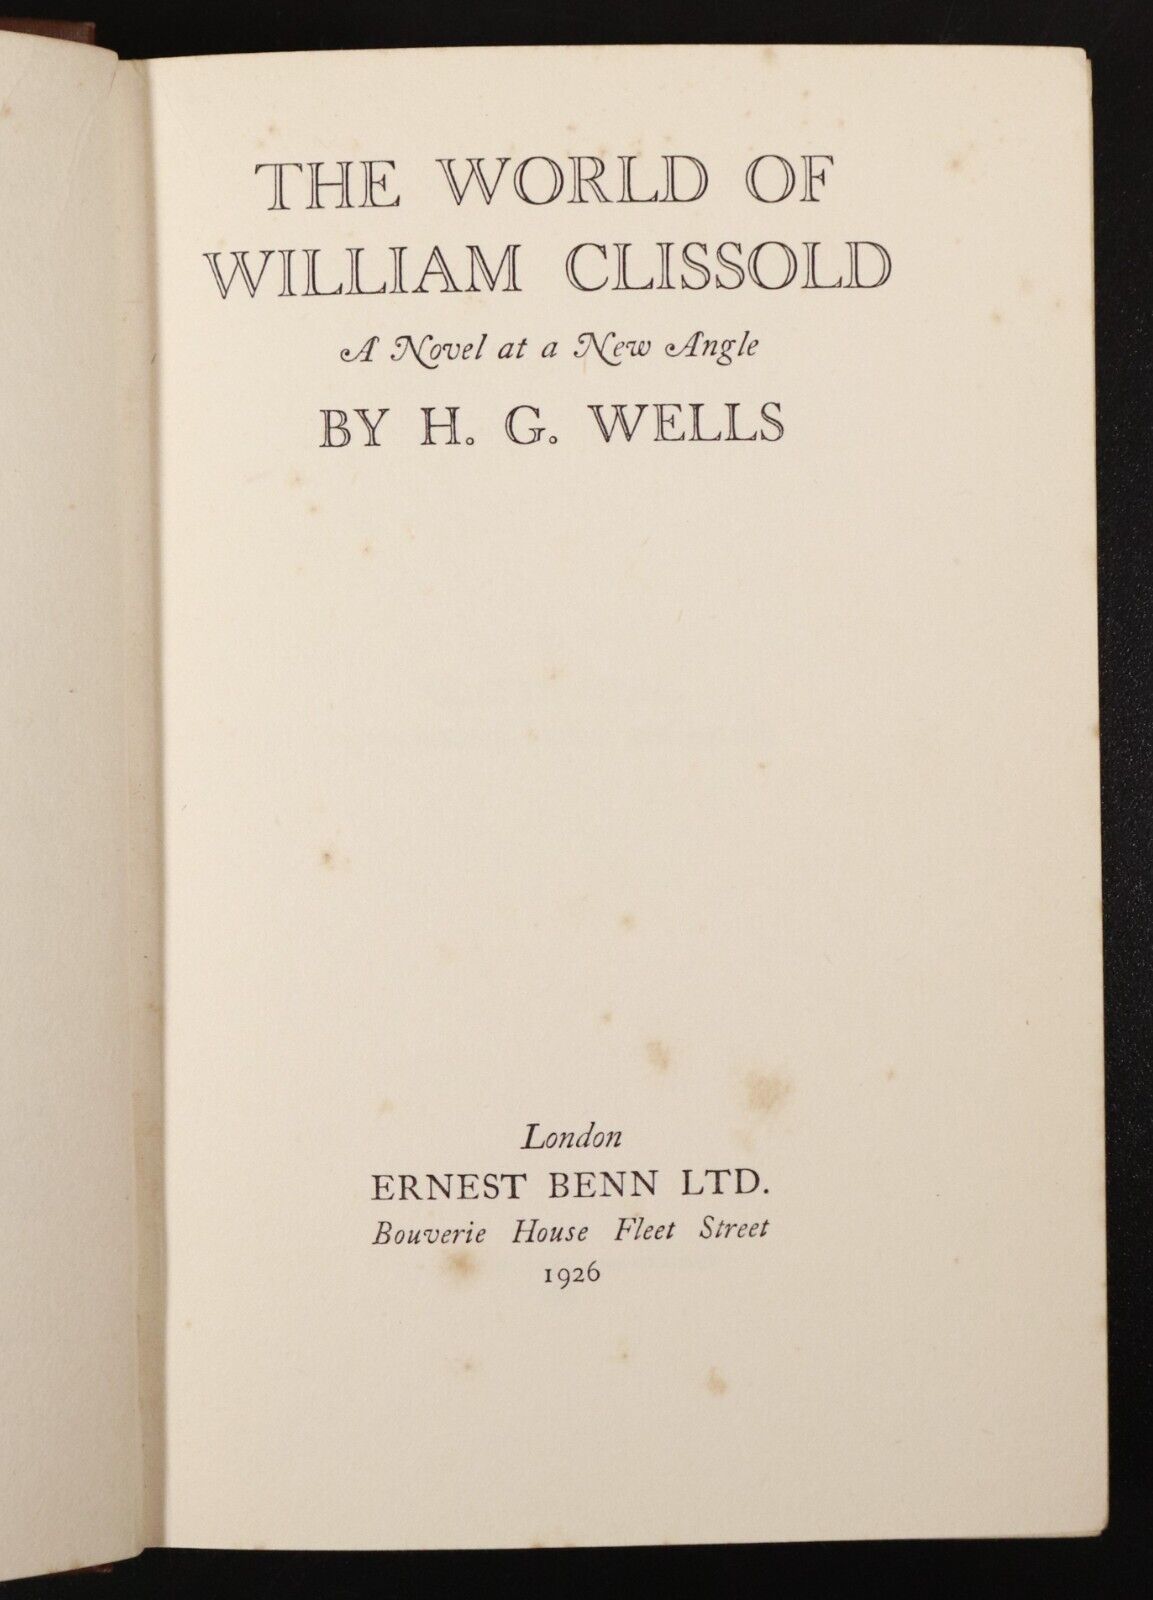 1926 The World Of William Clissold by H.G. Wells Antique Fiction Book Vol 1 - 0